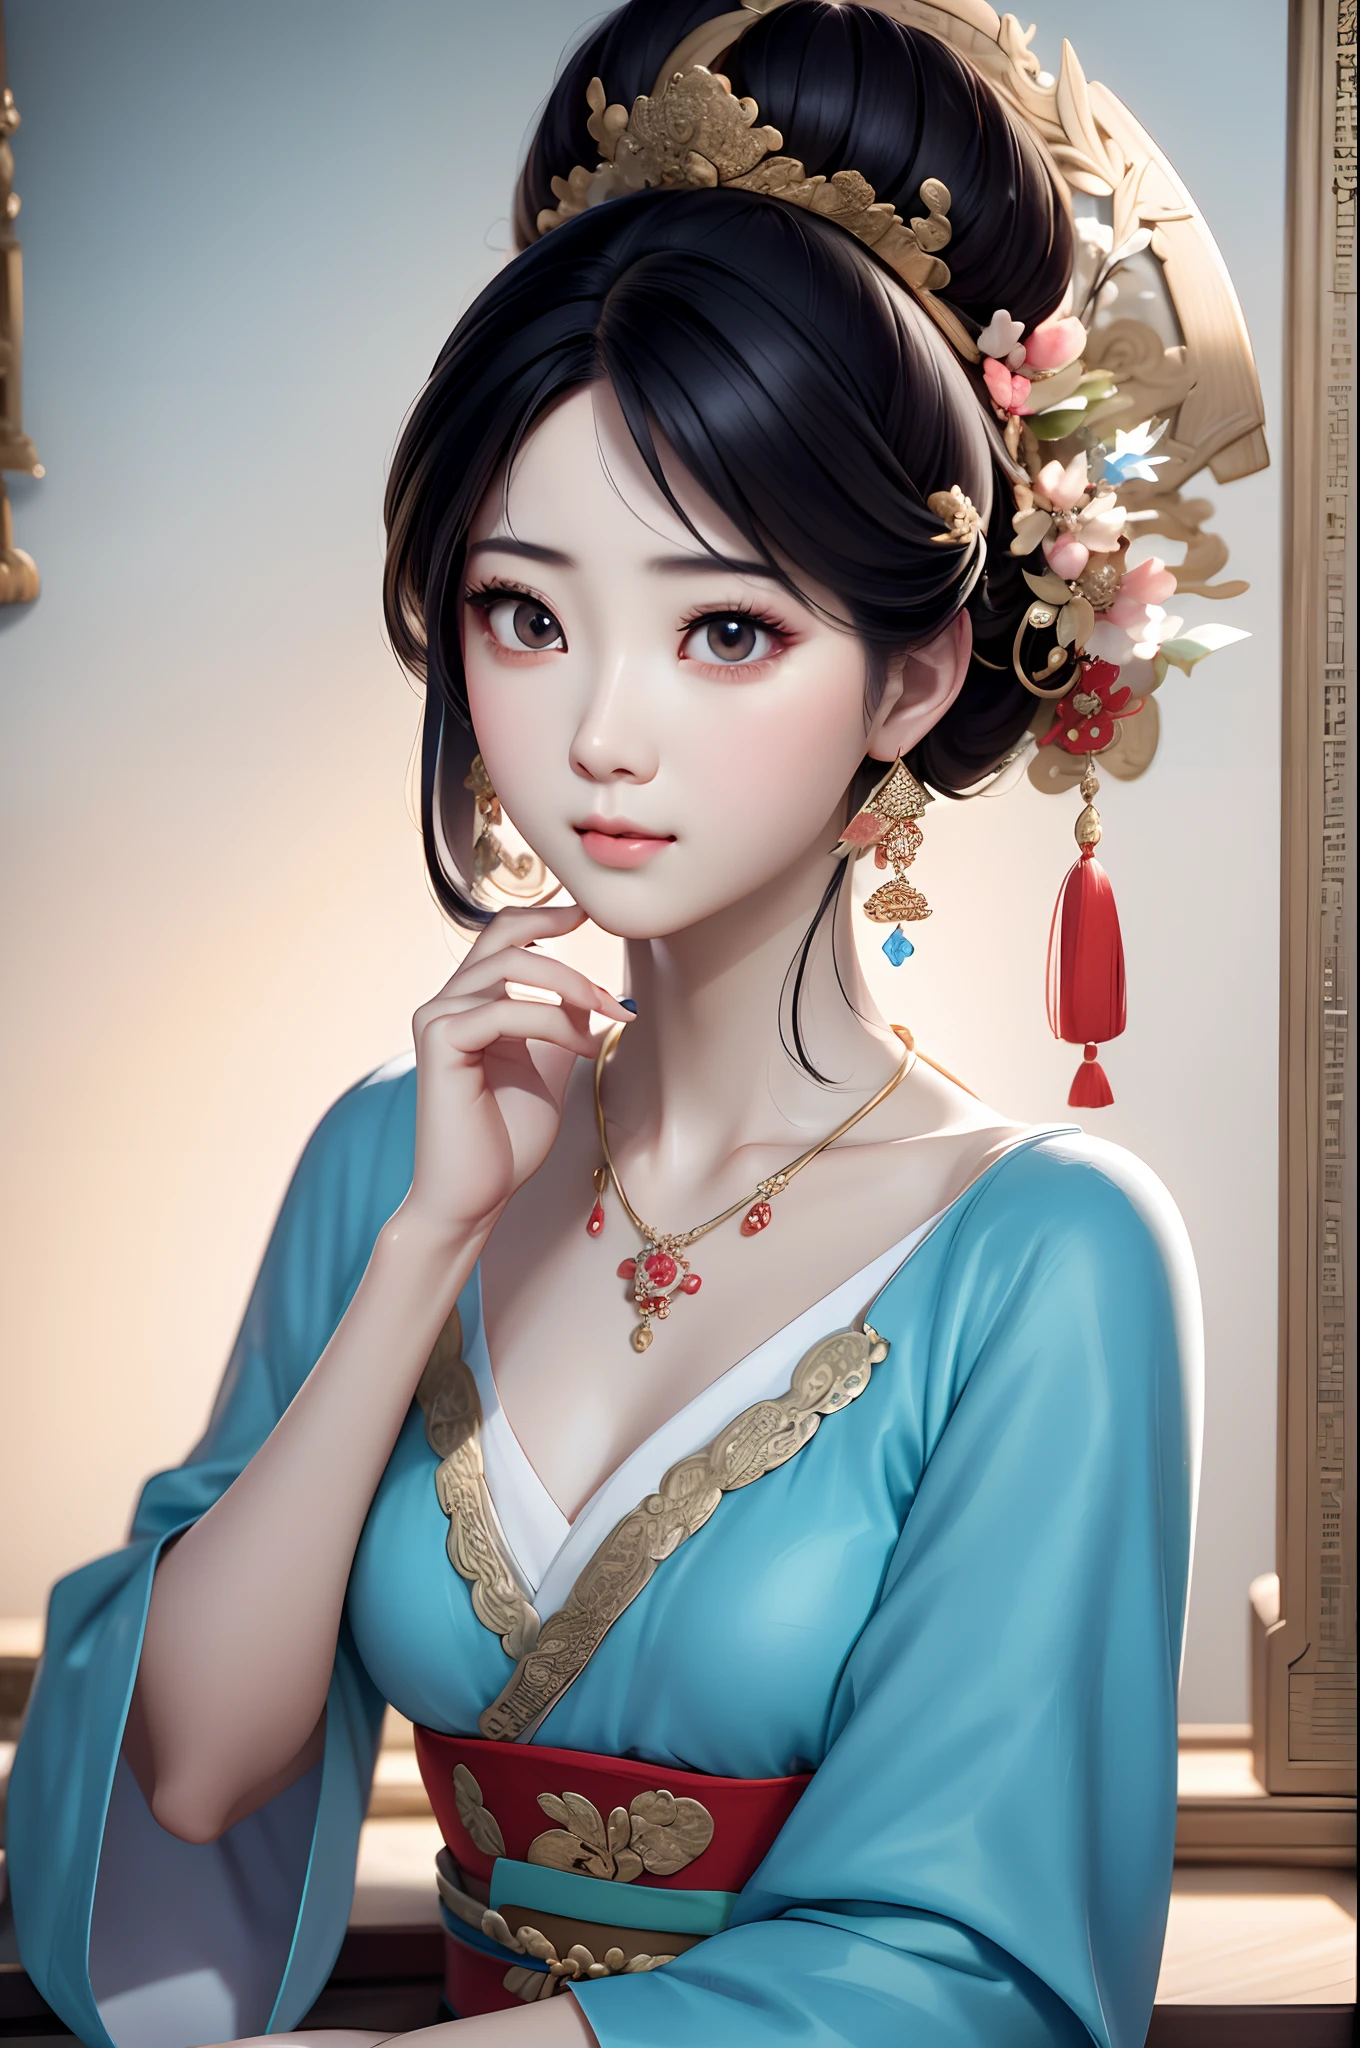 Close-up of a woman wearing a light blue slip dress necklace, Chinese style, Chinese girl, Beautiful character painting, Guviz-style artwork, Palace ， A girl in Hanfu, Beautiful rendering of the Tang Dynasty, Realistic anime 3 D style, trending on cgstation, 8K high quality detailed art, Princesa chinesa antiga, Chinese woman, Guviz